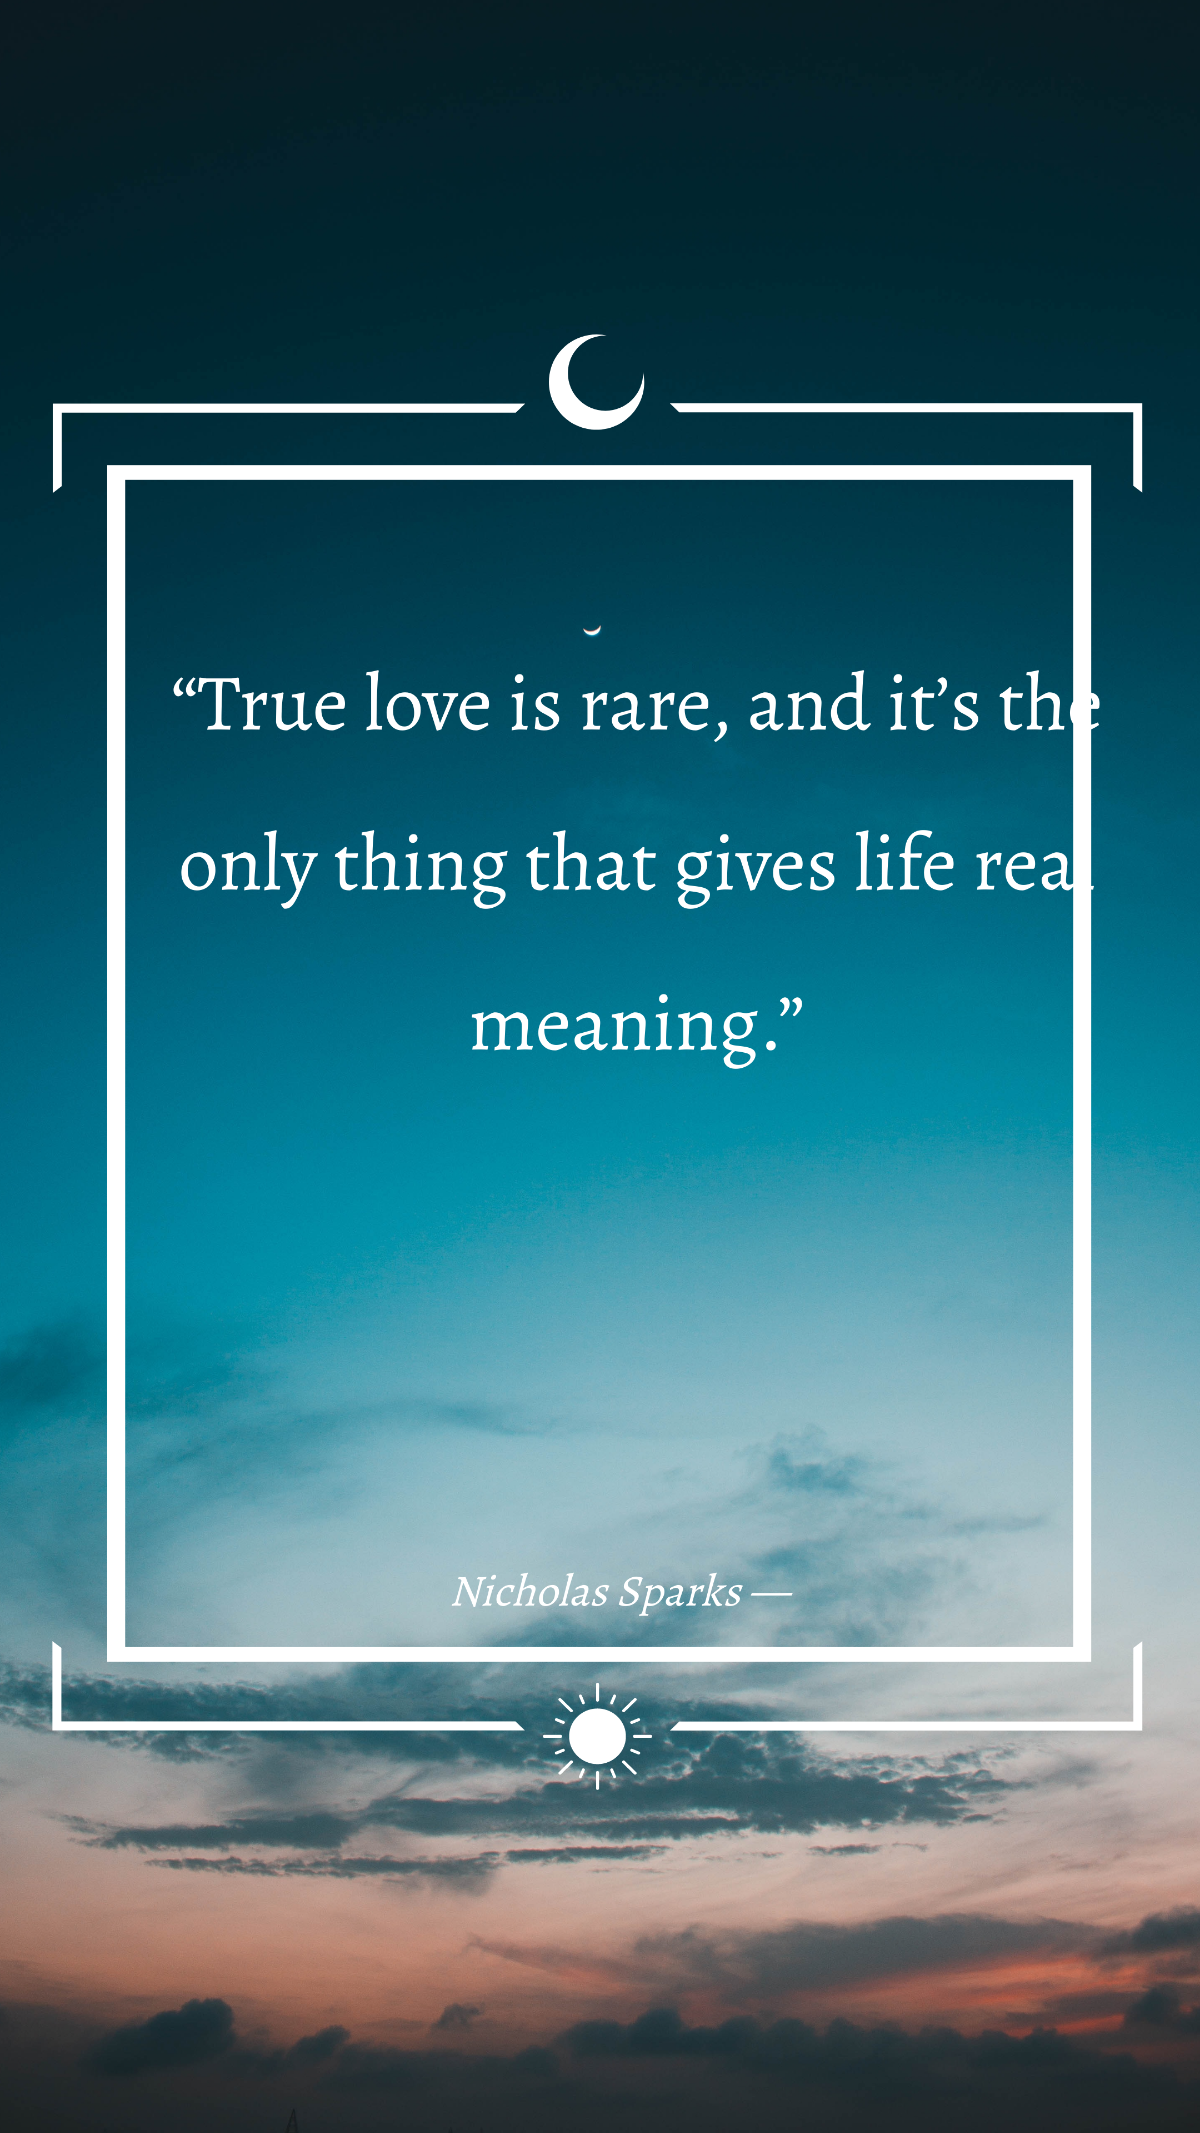 Nicholas Sparks — “True love is rare, and it’s the only thing that gives life real meaning.” Template